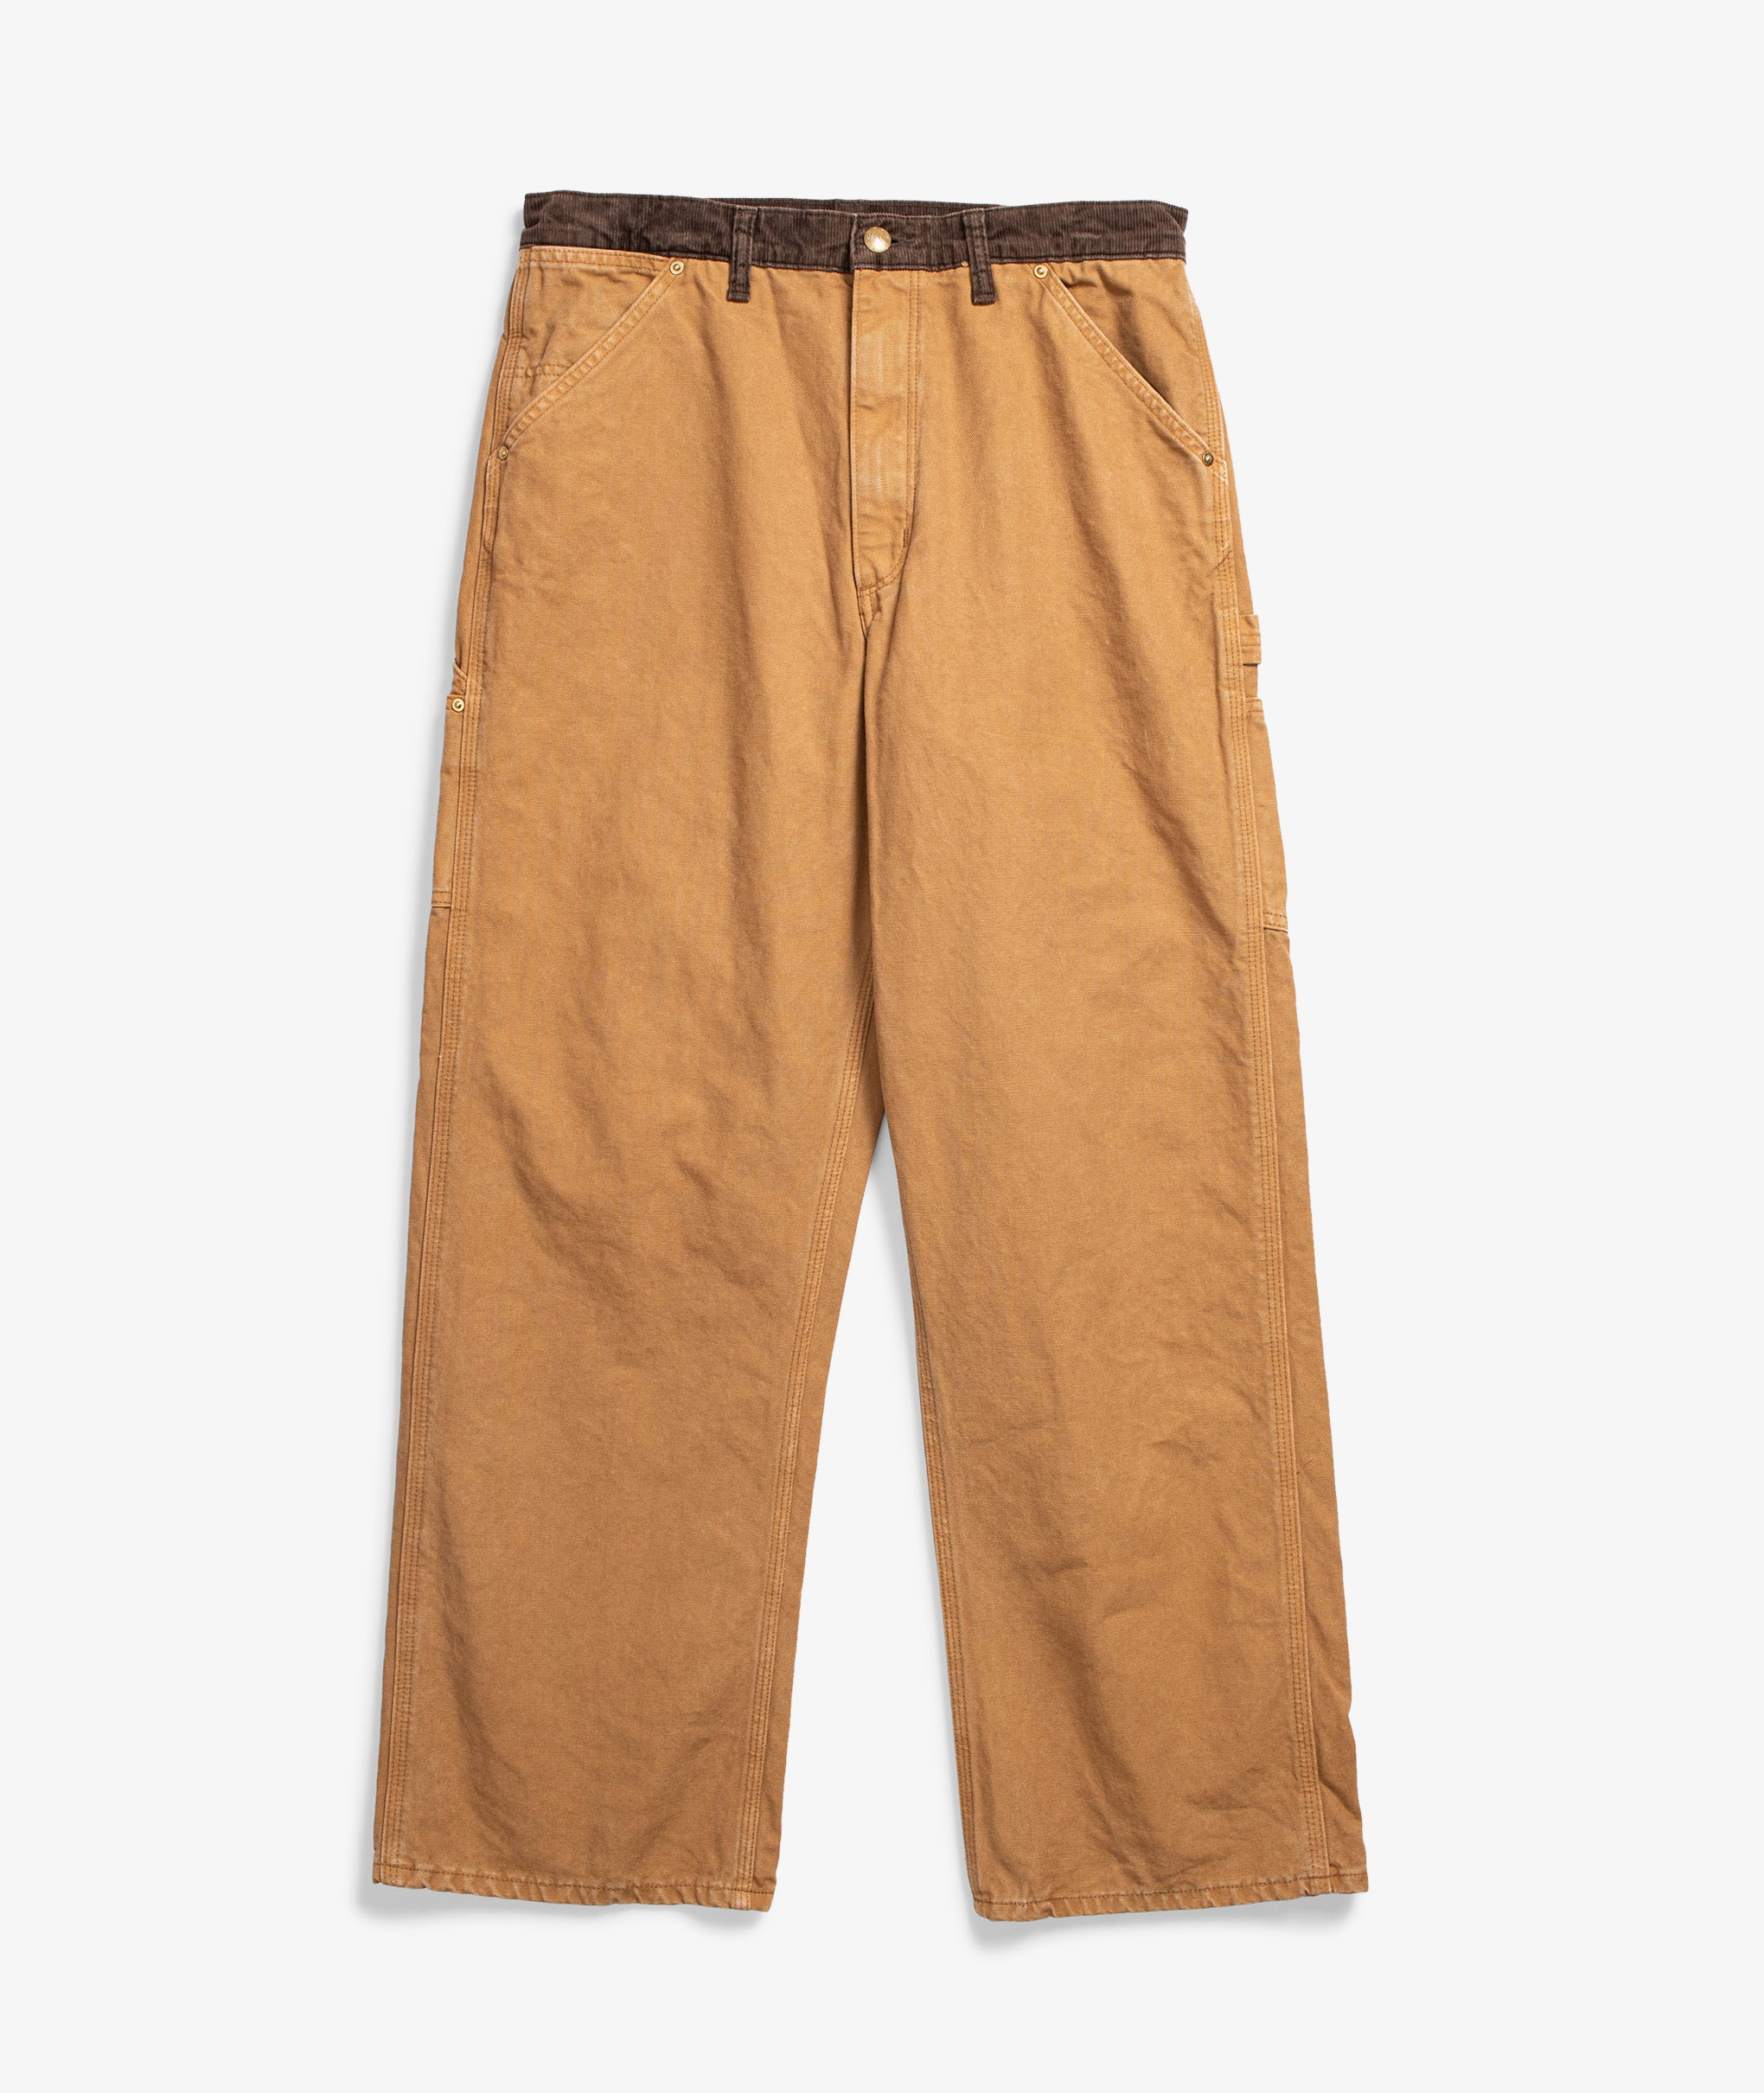 Norse Store | Shipping Worldwide - orSlow Two Tone Oxford Painter Pants ...